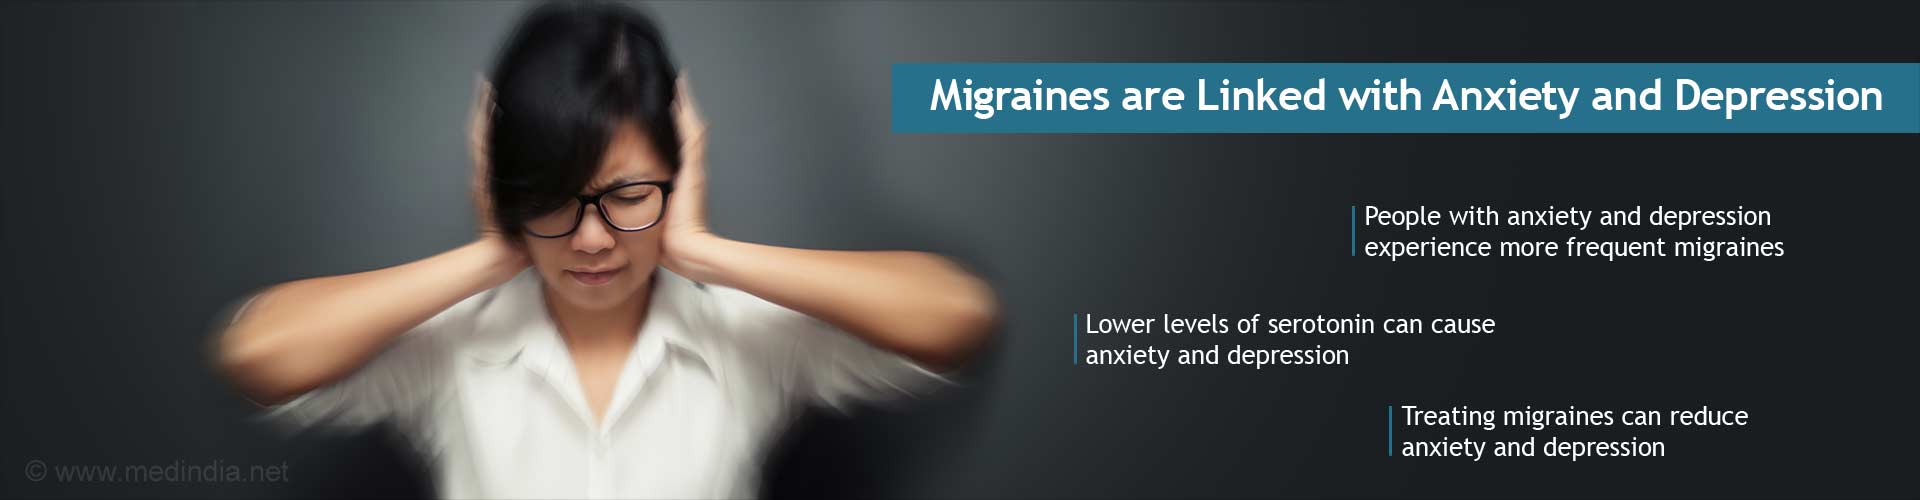 Migraines are linked with anxiety and depression
- People with anxiety and depression experience more frequent migraines
- Lower levels of serotonin can cause anxiety and depression
- Treating migraines can reduce anxiety and depression